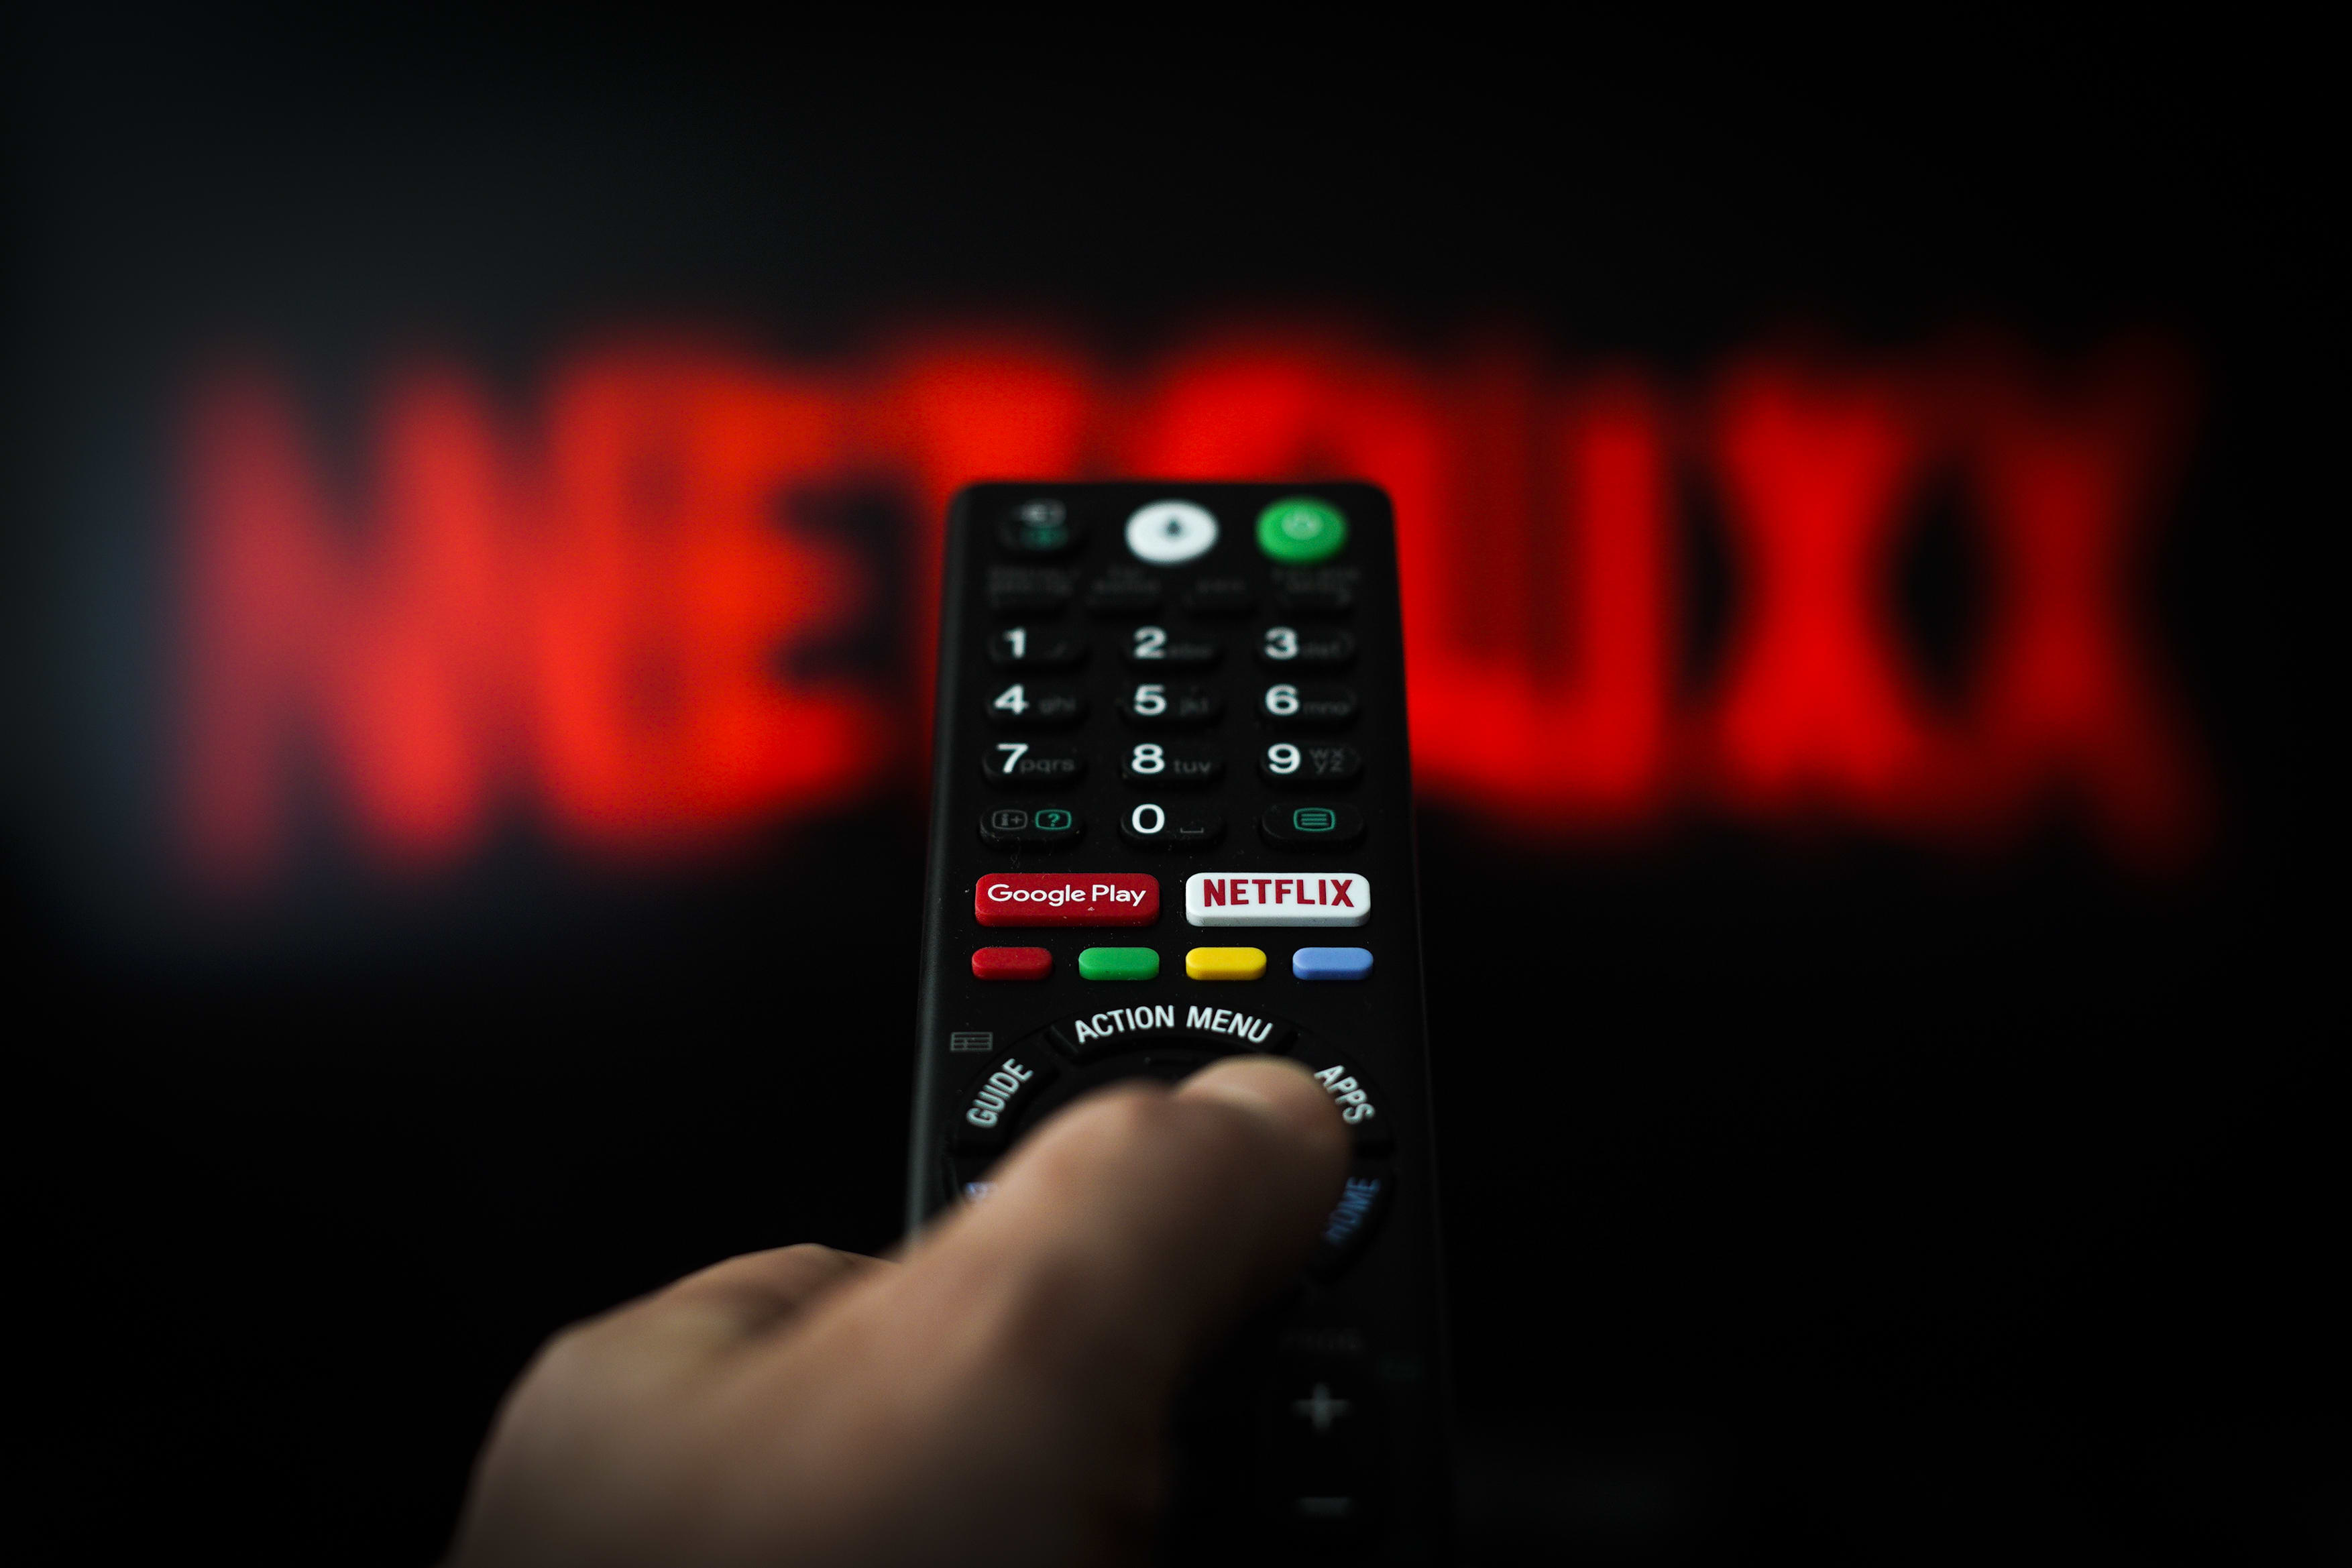 Netflix eager to restart production, has enough new content for 2020